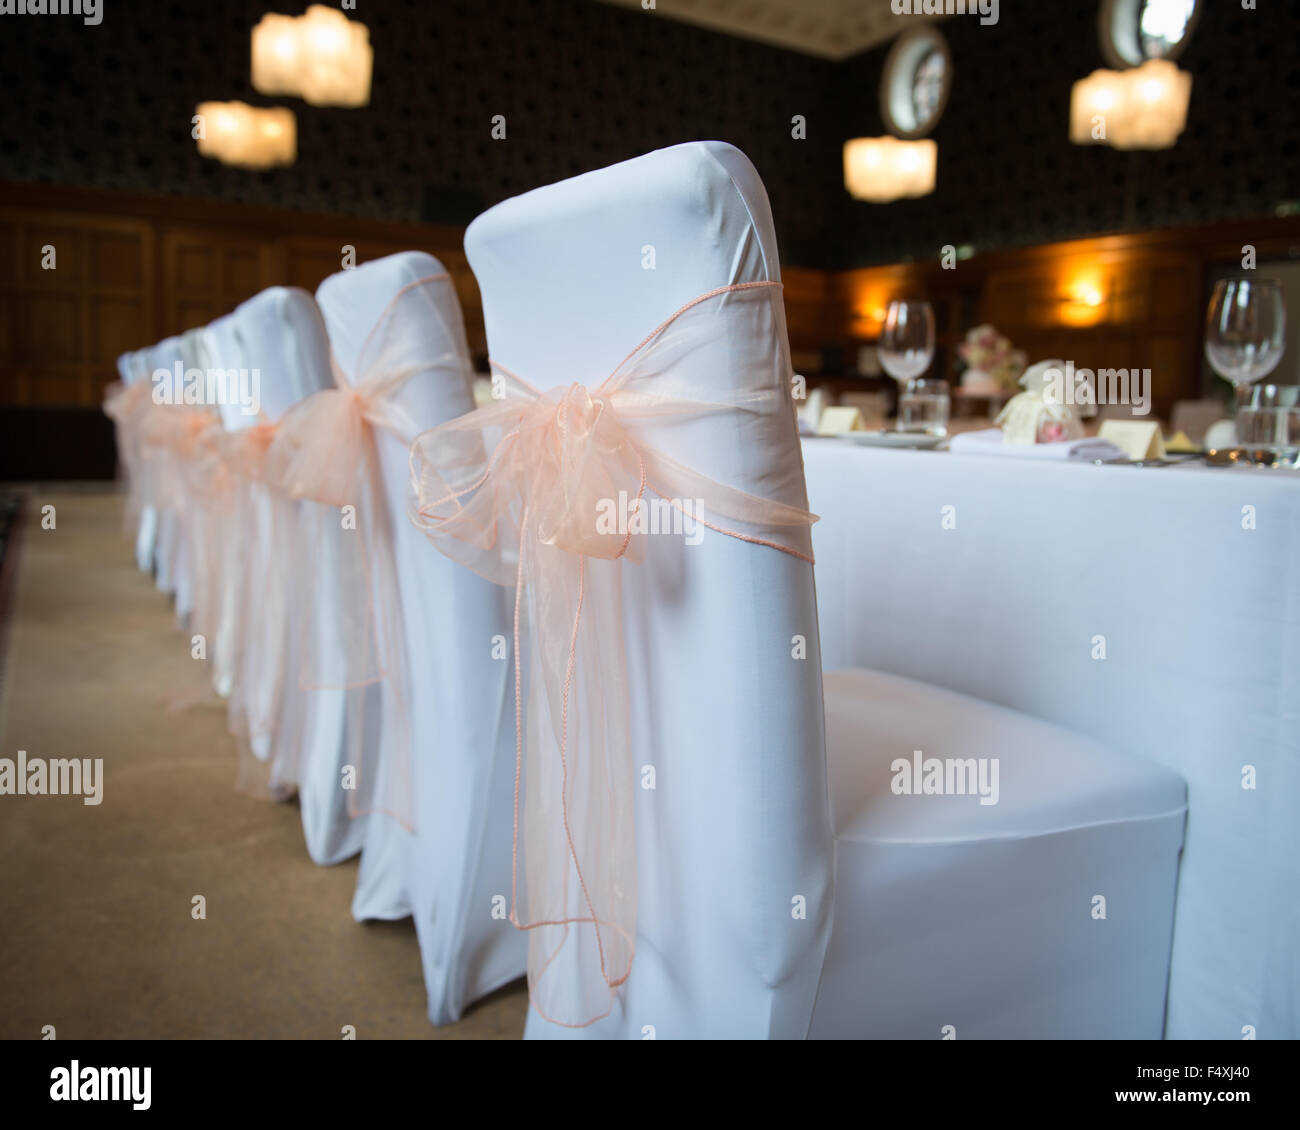 wedding chair covers with bows white covers with peach bows for wedding reception Stock Photo